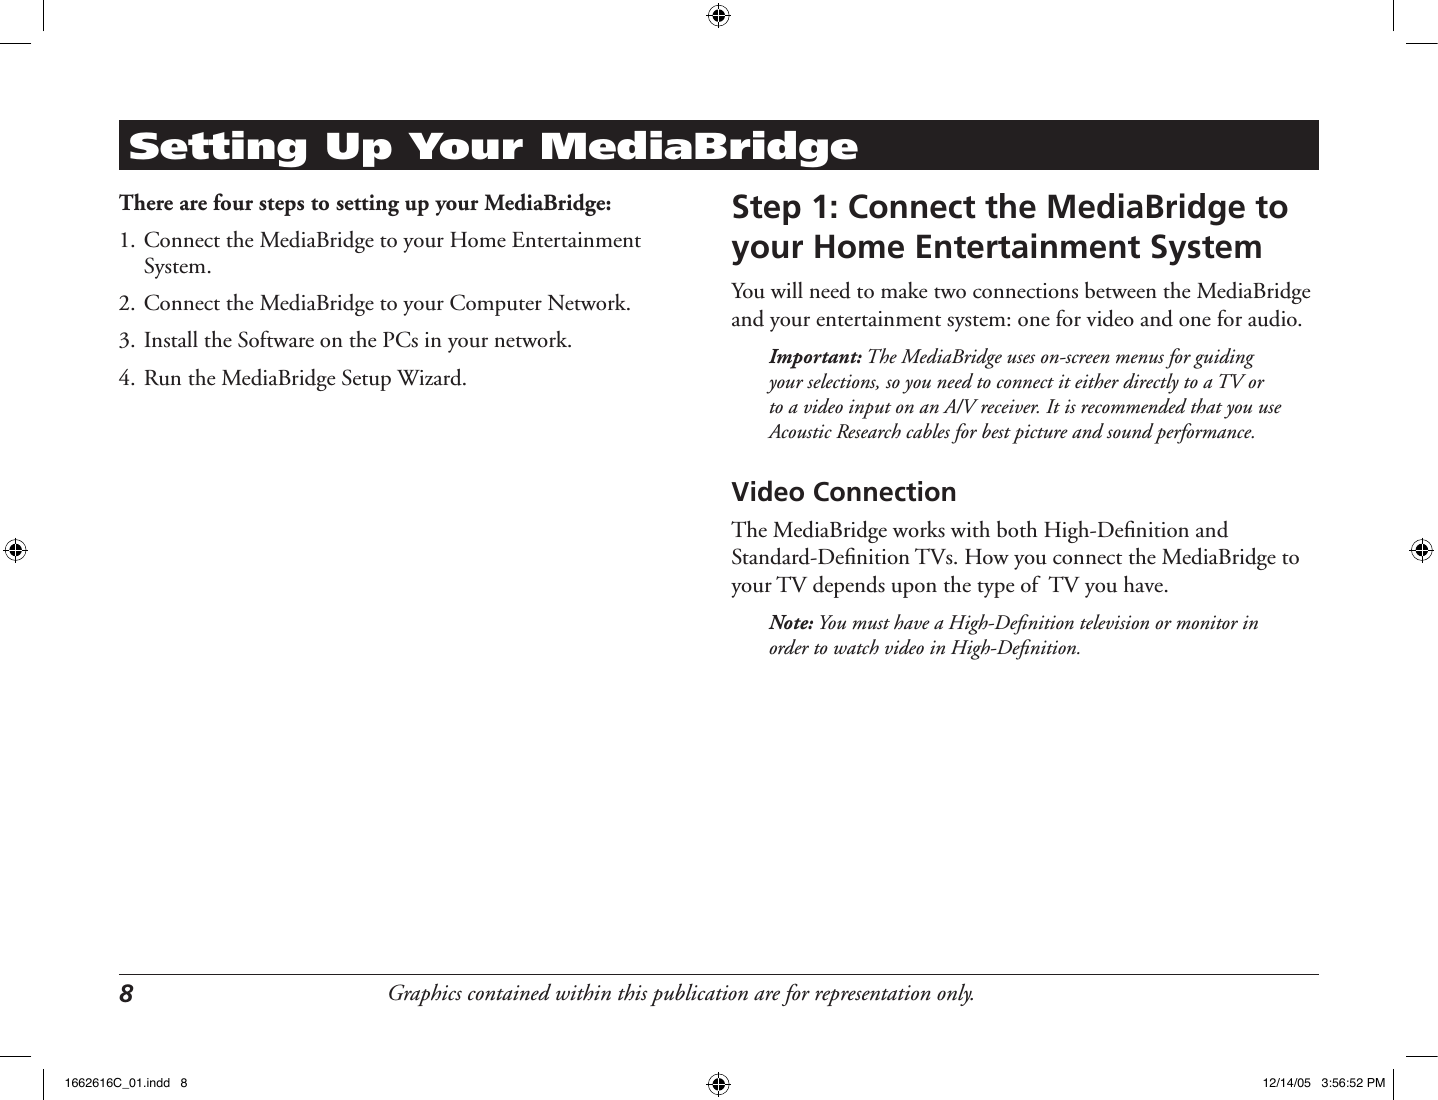 Graphics contained within this publication are for representation only.8 Setting Up Your MediaBridgeThere are four steps to setting up your MediaBridge:1. Connect the MediaBridge to your Home Entertainment System.2. Connect the MediaBridge to your Computer Network.3. Install the Software on the PCs in your network.4. Run the MediaBridge Setup Wizard.Step 1: Connect the MediaBridge to your Home Entertainment SystemYou will need to make two connections between the MediaBridge and your entertainment system: one for video and one for audio. Important: The MediaBridge uses on-screen menus for guiding your selections, so you need to connect it either directly to a TV or to a video input on an A/V receiver. It is recommended that you use Acoustic Research cables for best picture and sound performance.Video ConnectionThe MediaBridge works with both High-Deﬁnition and Standard-Deﬁnition TVs. How you connect the MediaBridge to your TV depends upon the type of  TV you have. Note: You must have a High-Deﬁnition television or monitor in order to watch video in High-Deﬁnition. 1662616C_01.indd   8 12/14/05   3:56:52 PM